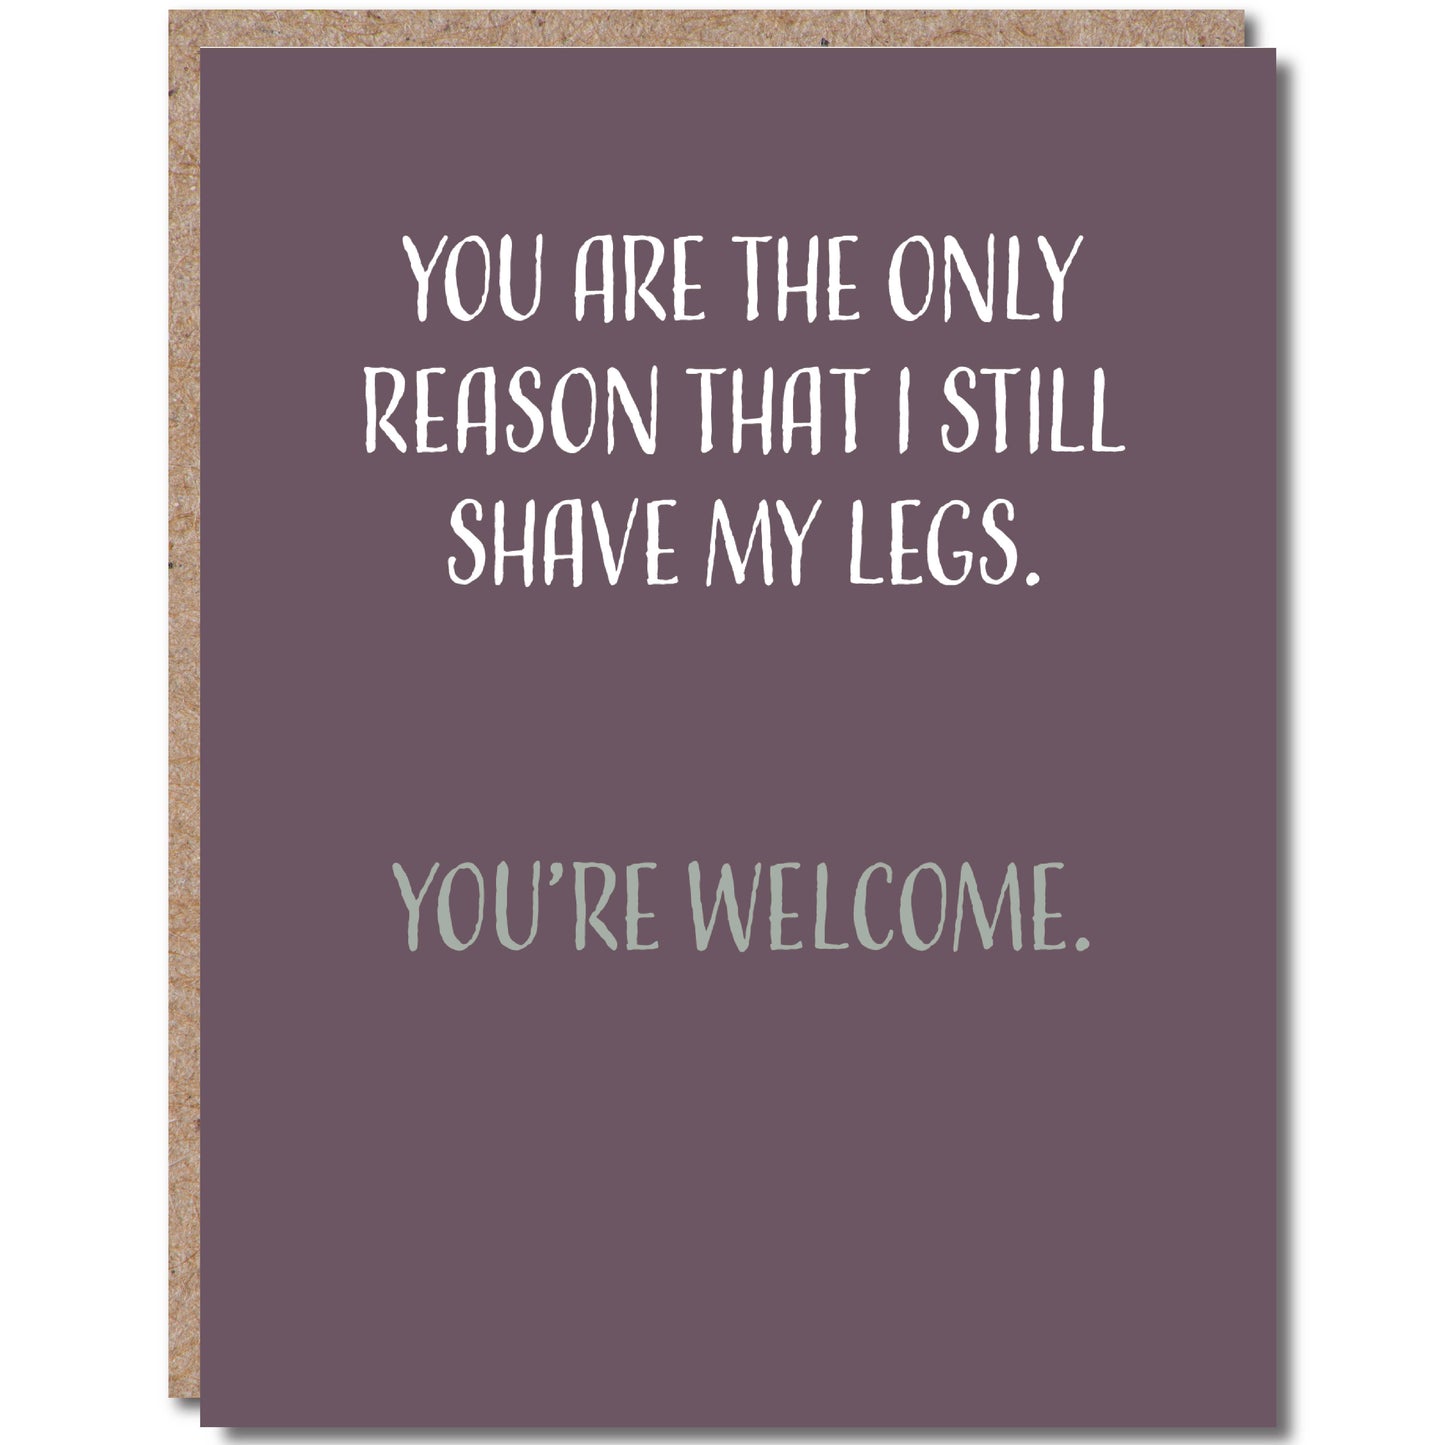 You're Still The Only Reason I Shave